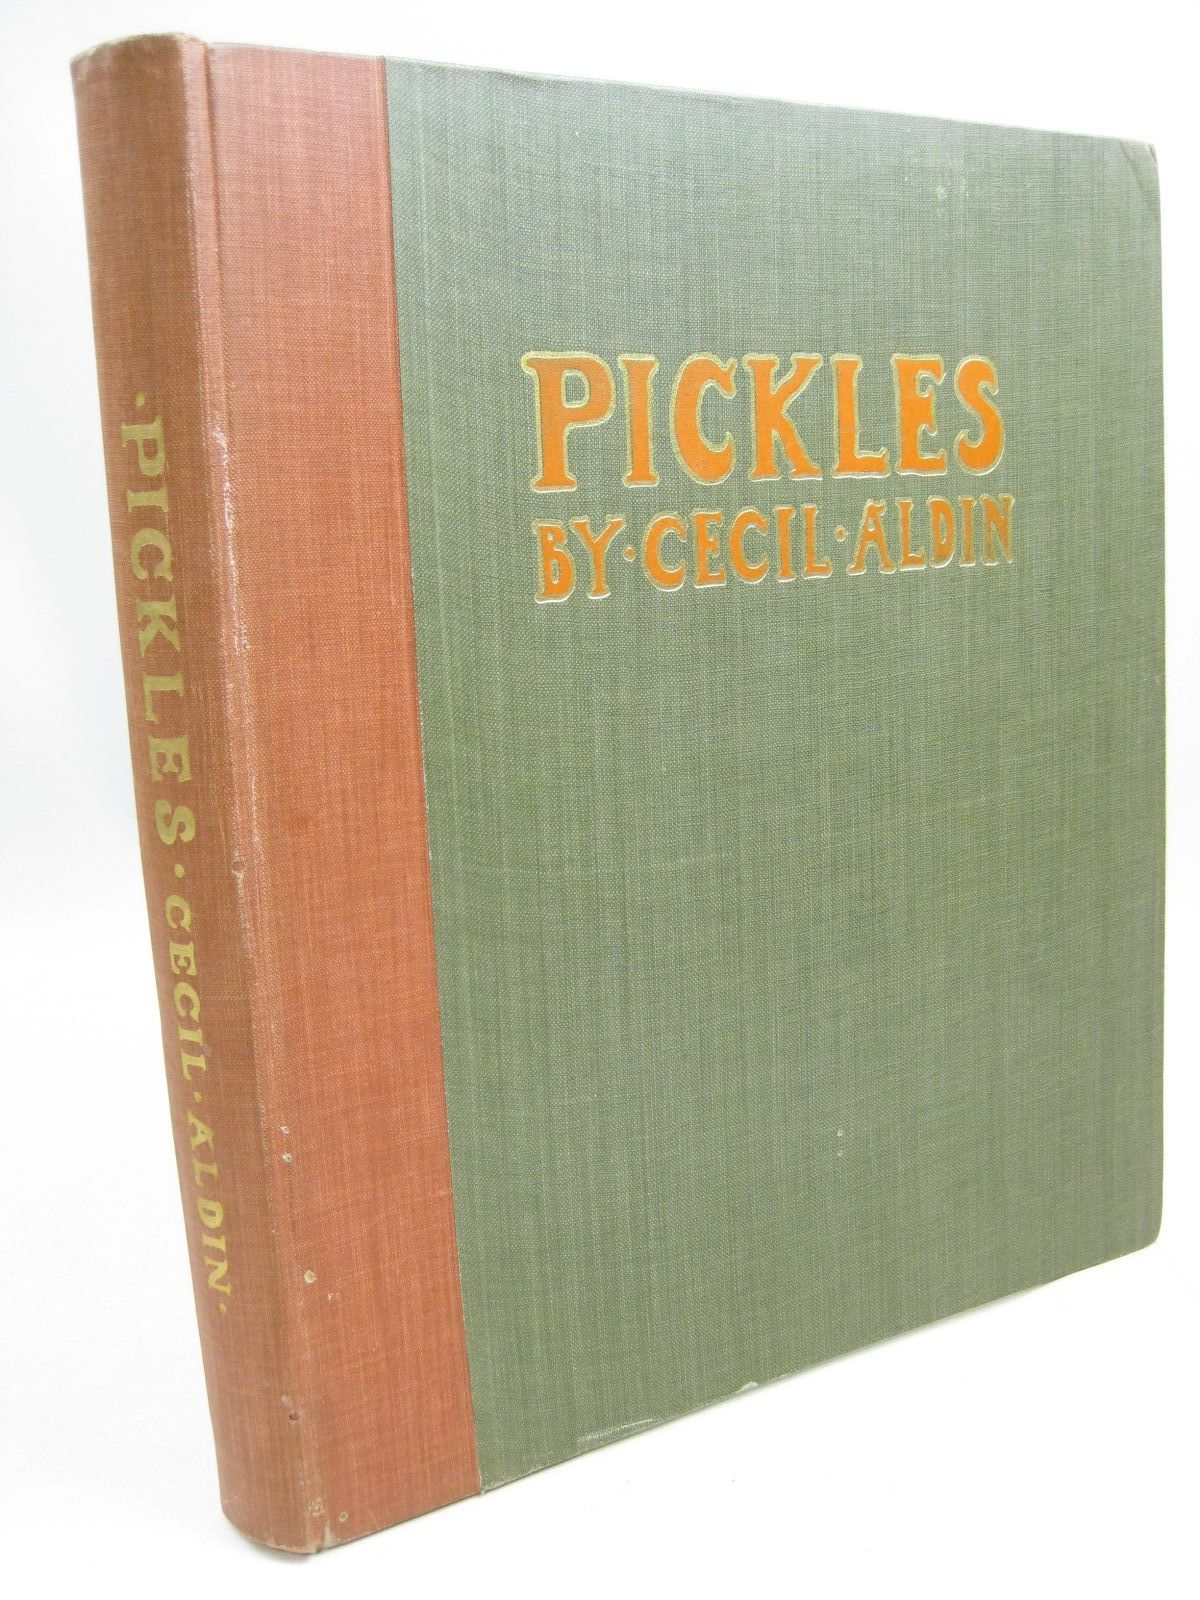 Photo of PICKLES written by Aldin, Cecil illustrated by Aldin, Cecil published by Henry Frowde, Hodder &amp; Stoughton (STOCK CODE: 1315489)  for sale by Stella & Rose's Books